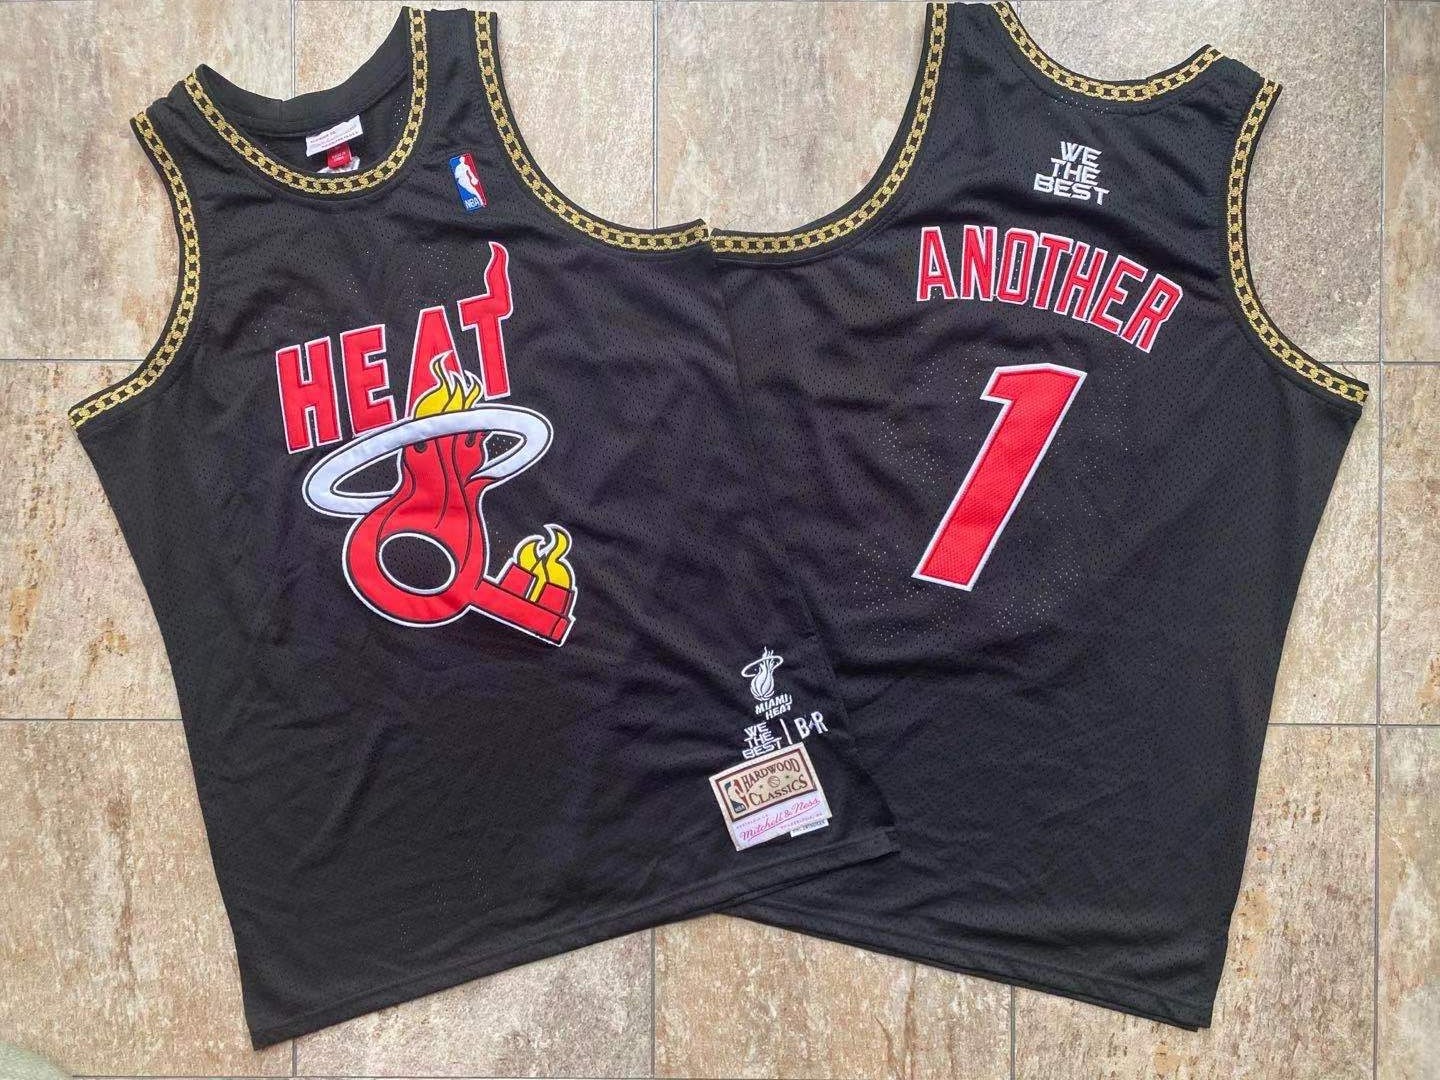 Heat 1 Another Black We the best and BR Hardwood Classics Jersey